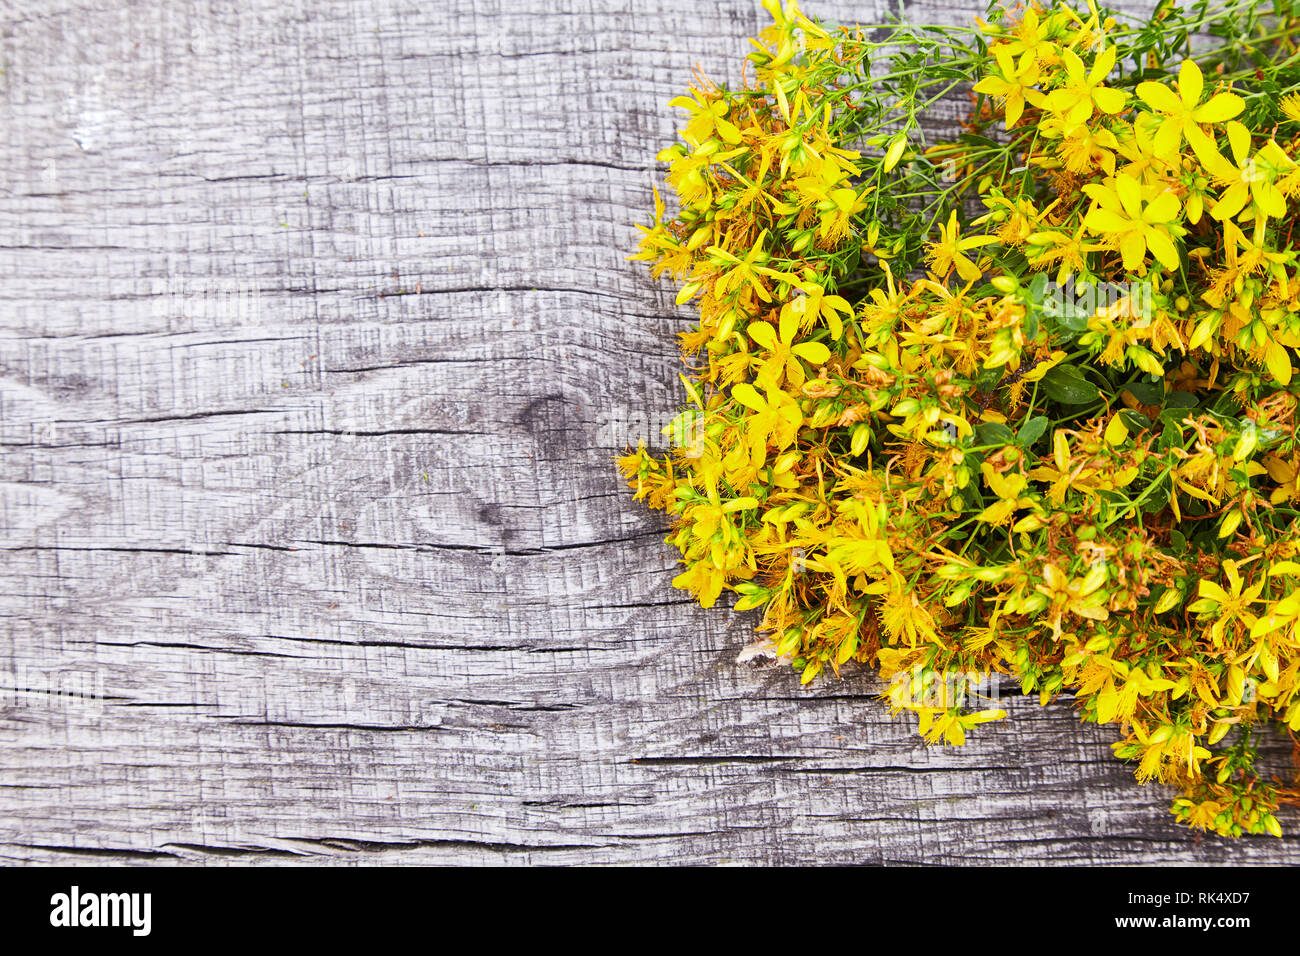 Hypericum - St Johns wort plants on wooden board, top view. Copy Space. Close Up Stock Photo